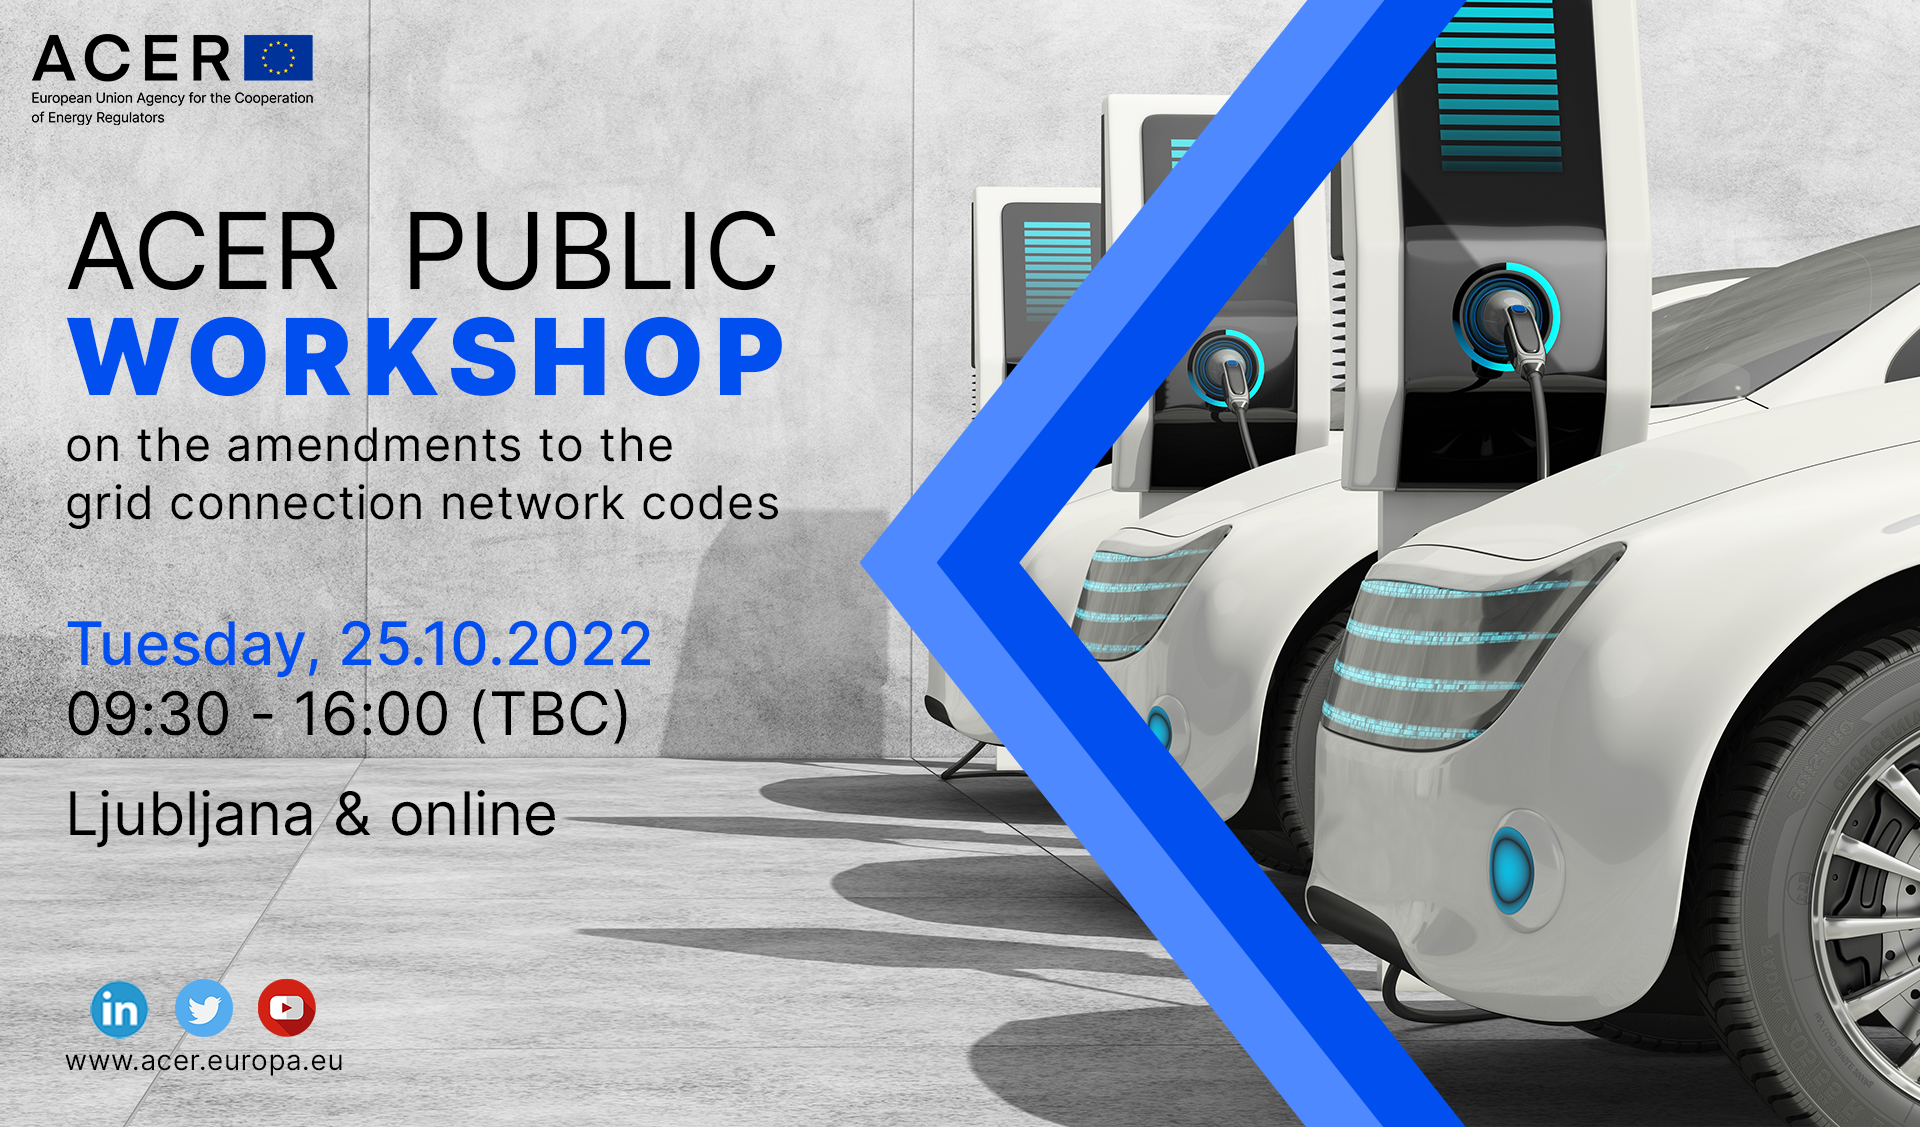 ACER Public Workshop on the amendments to the grid connection network codes